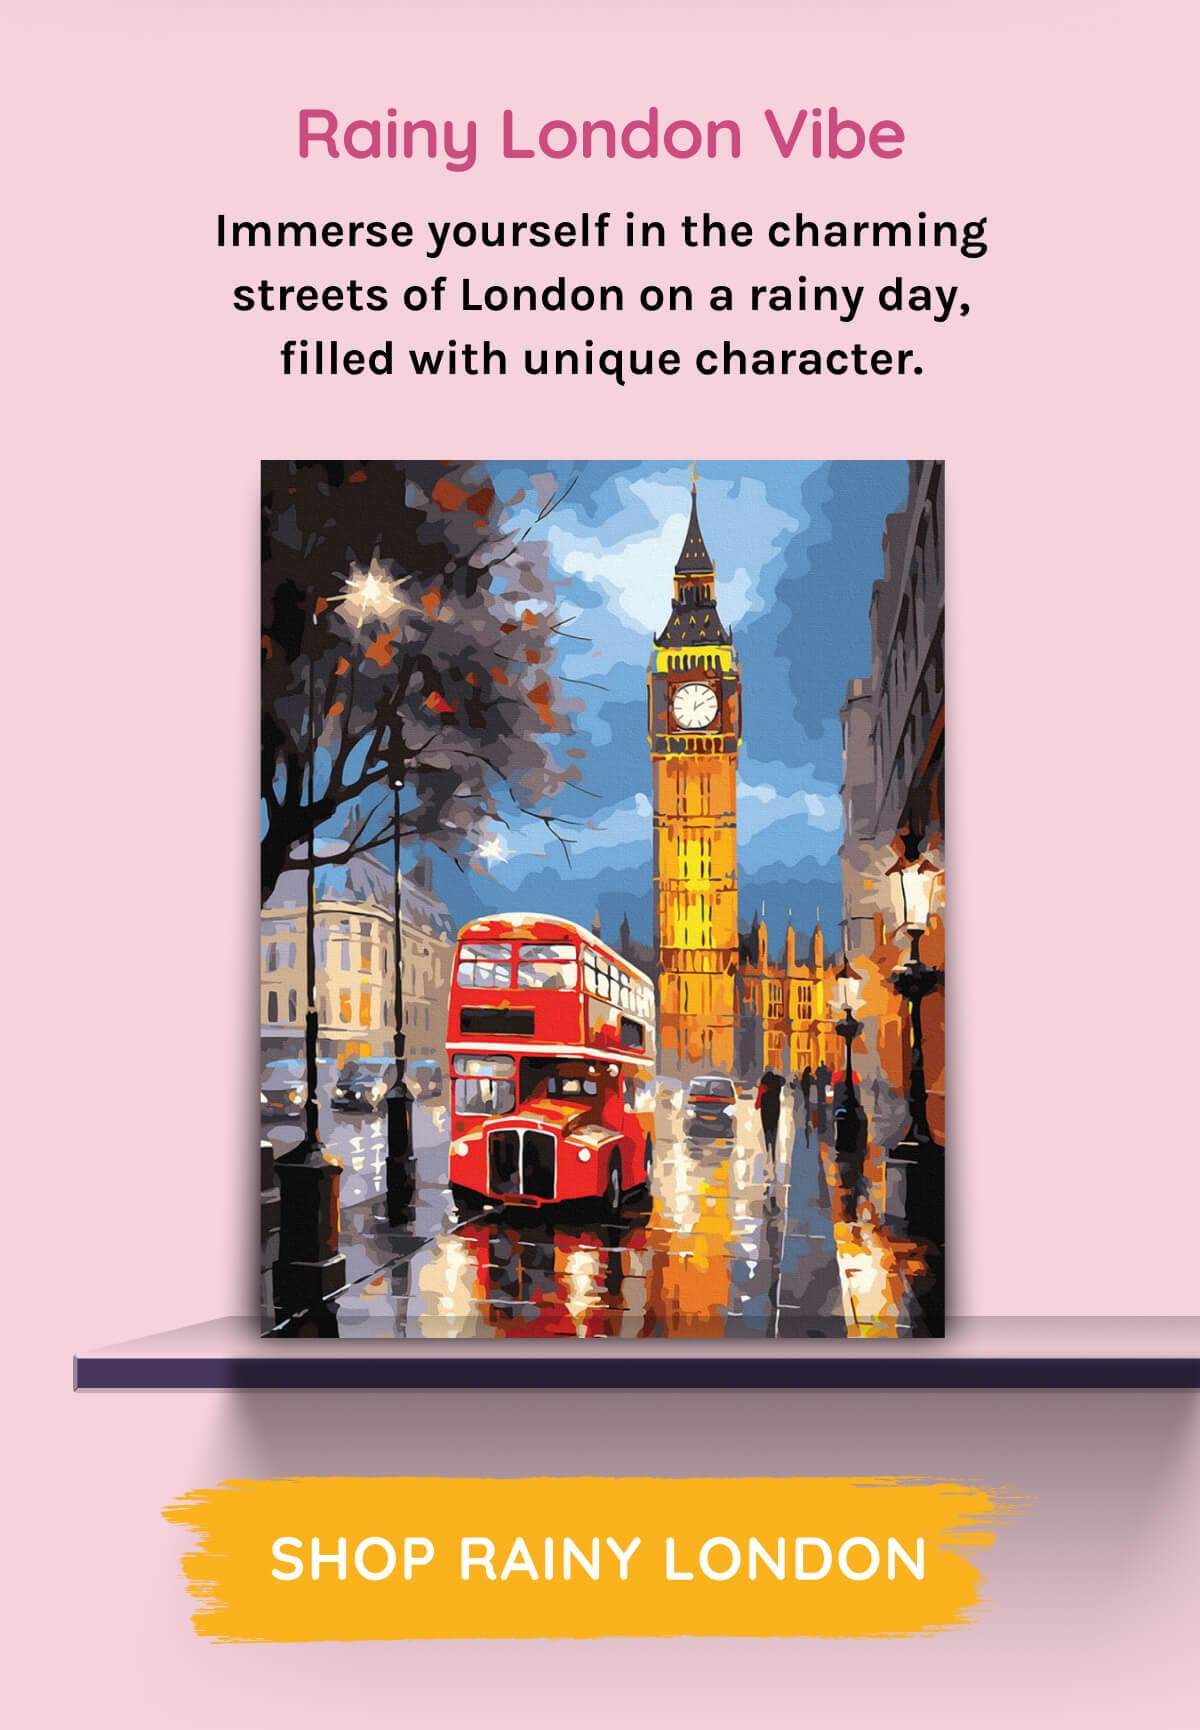 Rainy London Vibe Immerse yourself in the charming streets of London on a rainy day, filled with unique character.